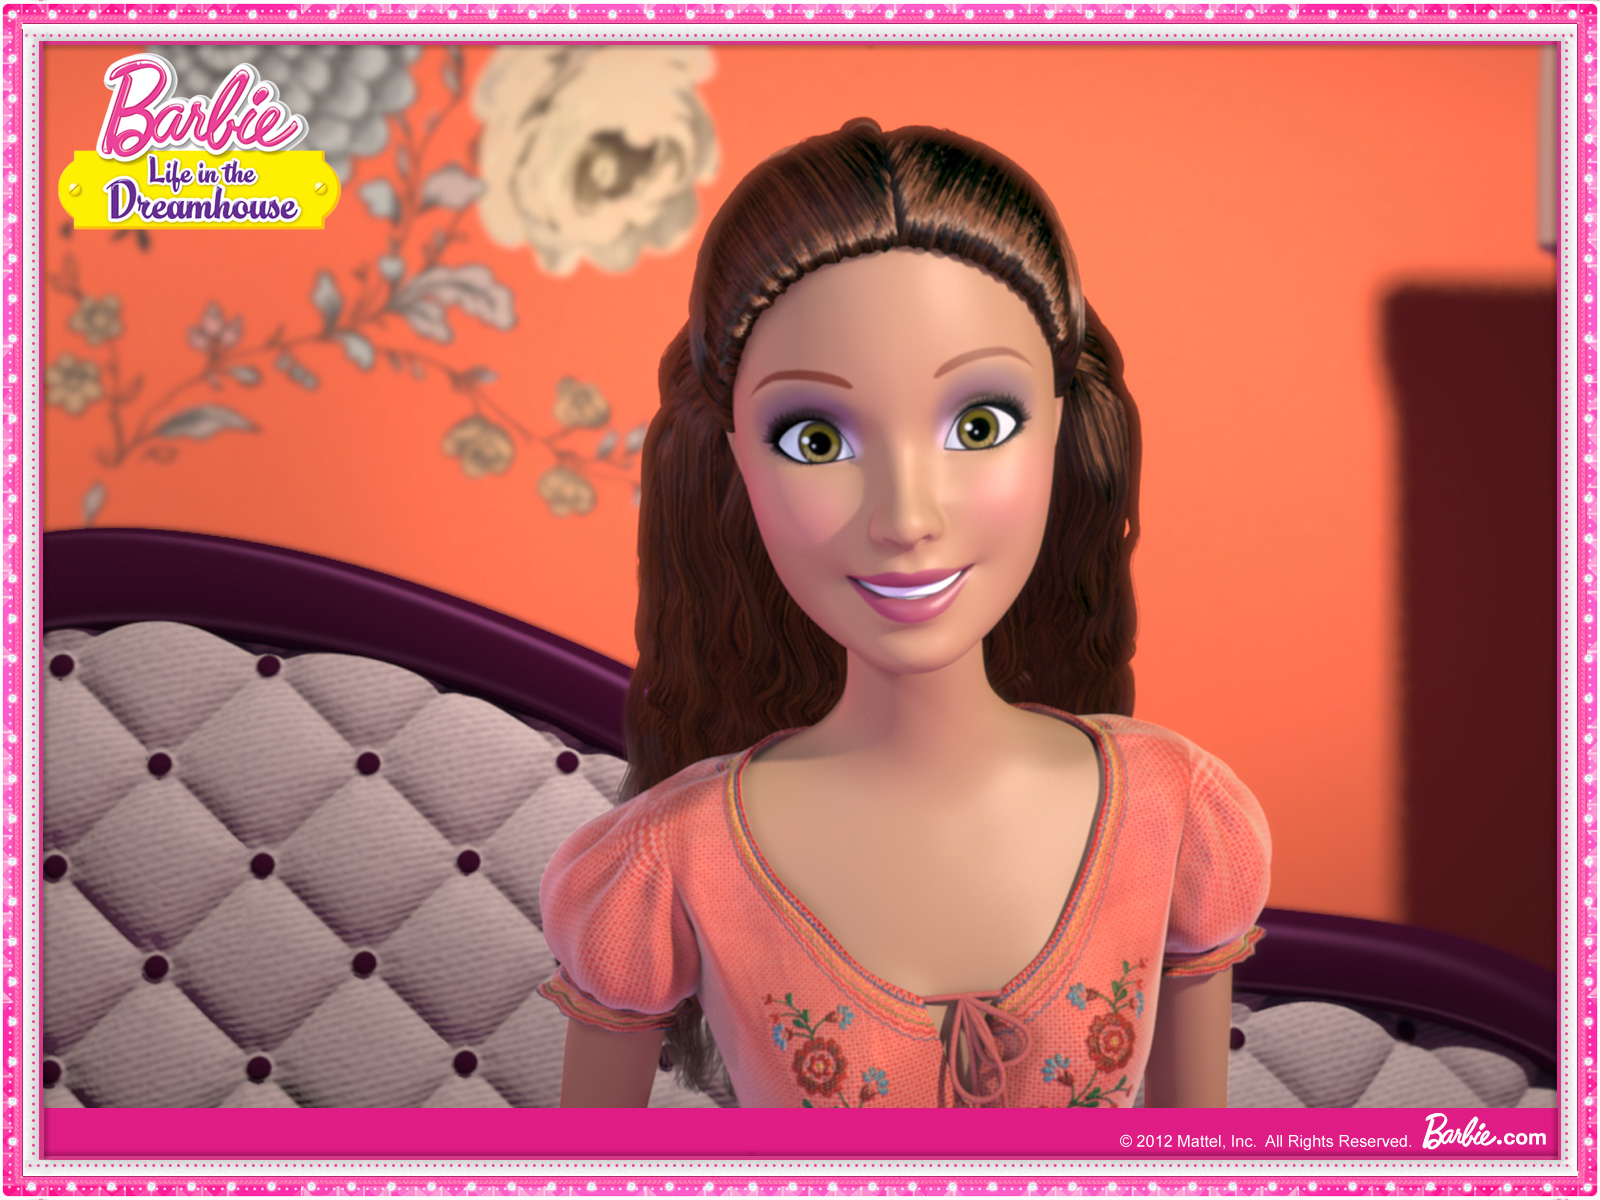 http://images5.fanpop.com/image/photos/30800000/Barbie-Life-in-the-Dreamhouse-barbie-movies-30845165-1600-1200.jpg